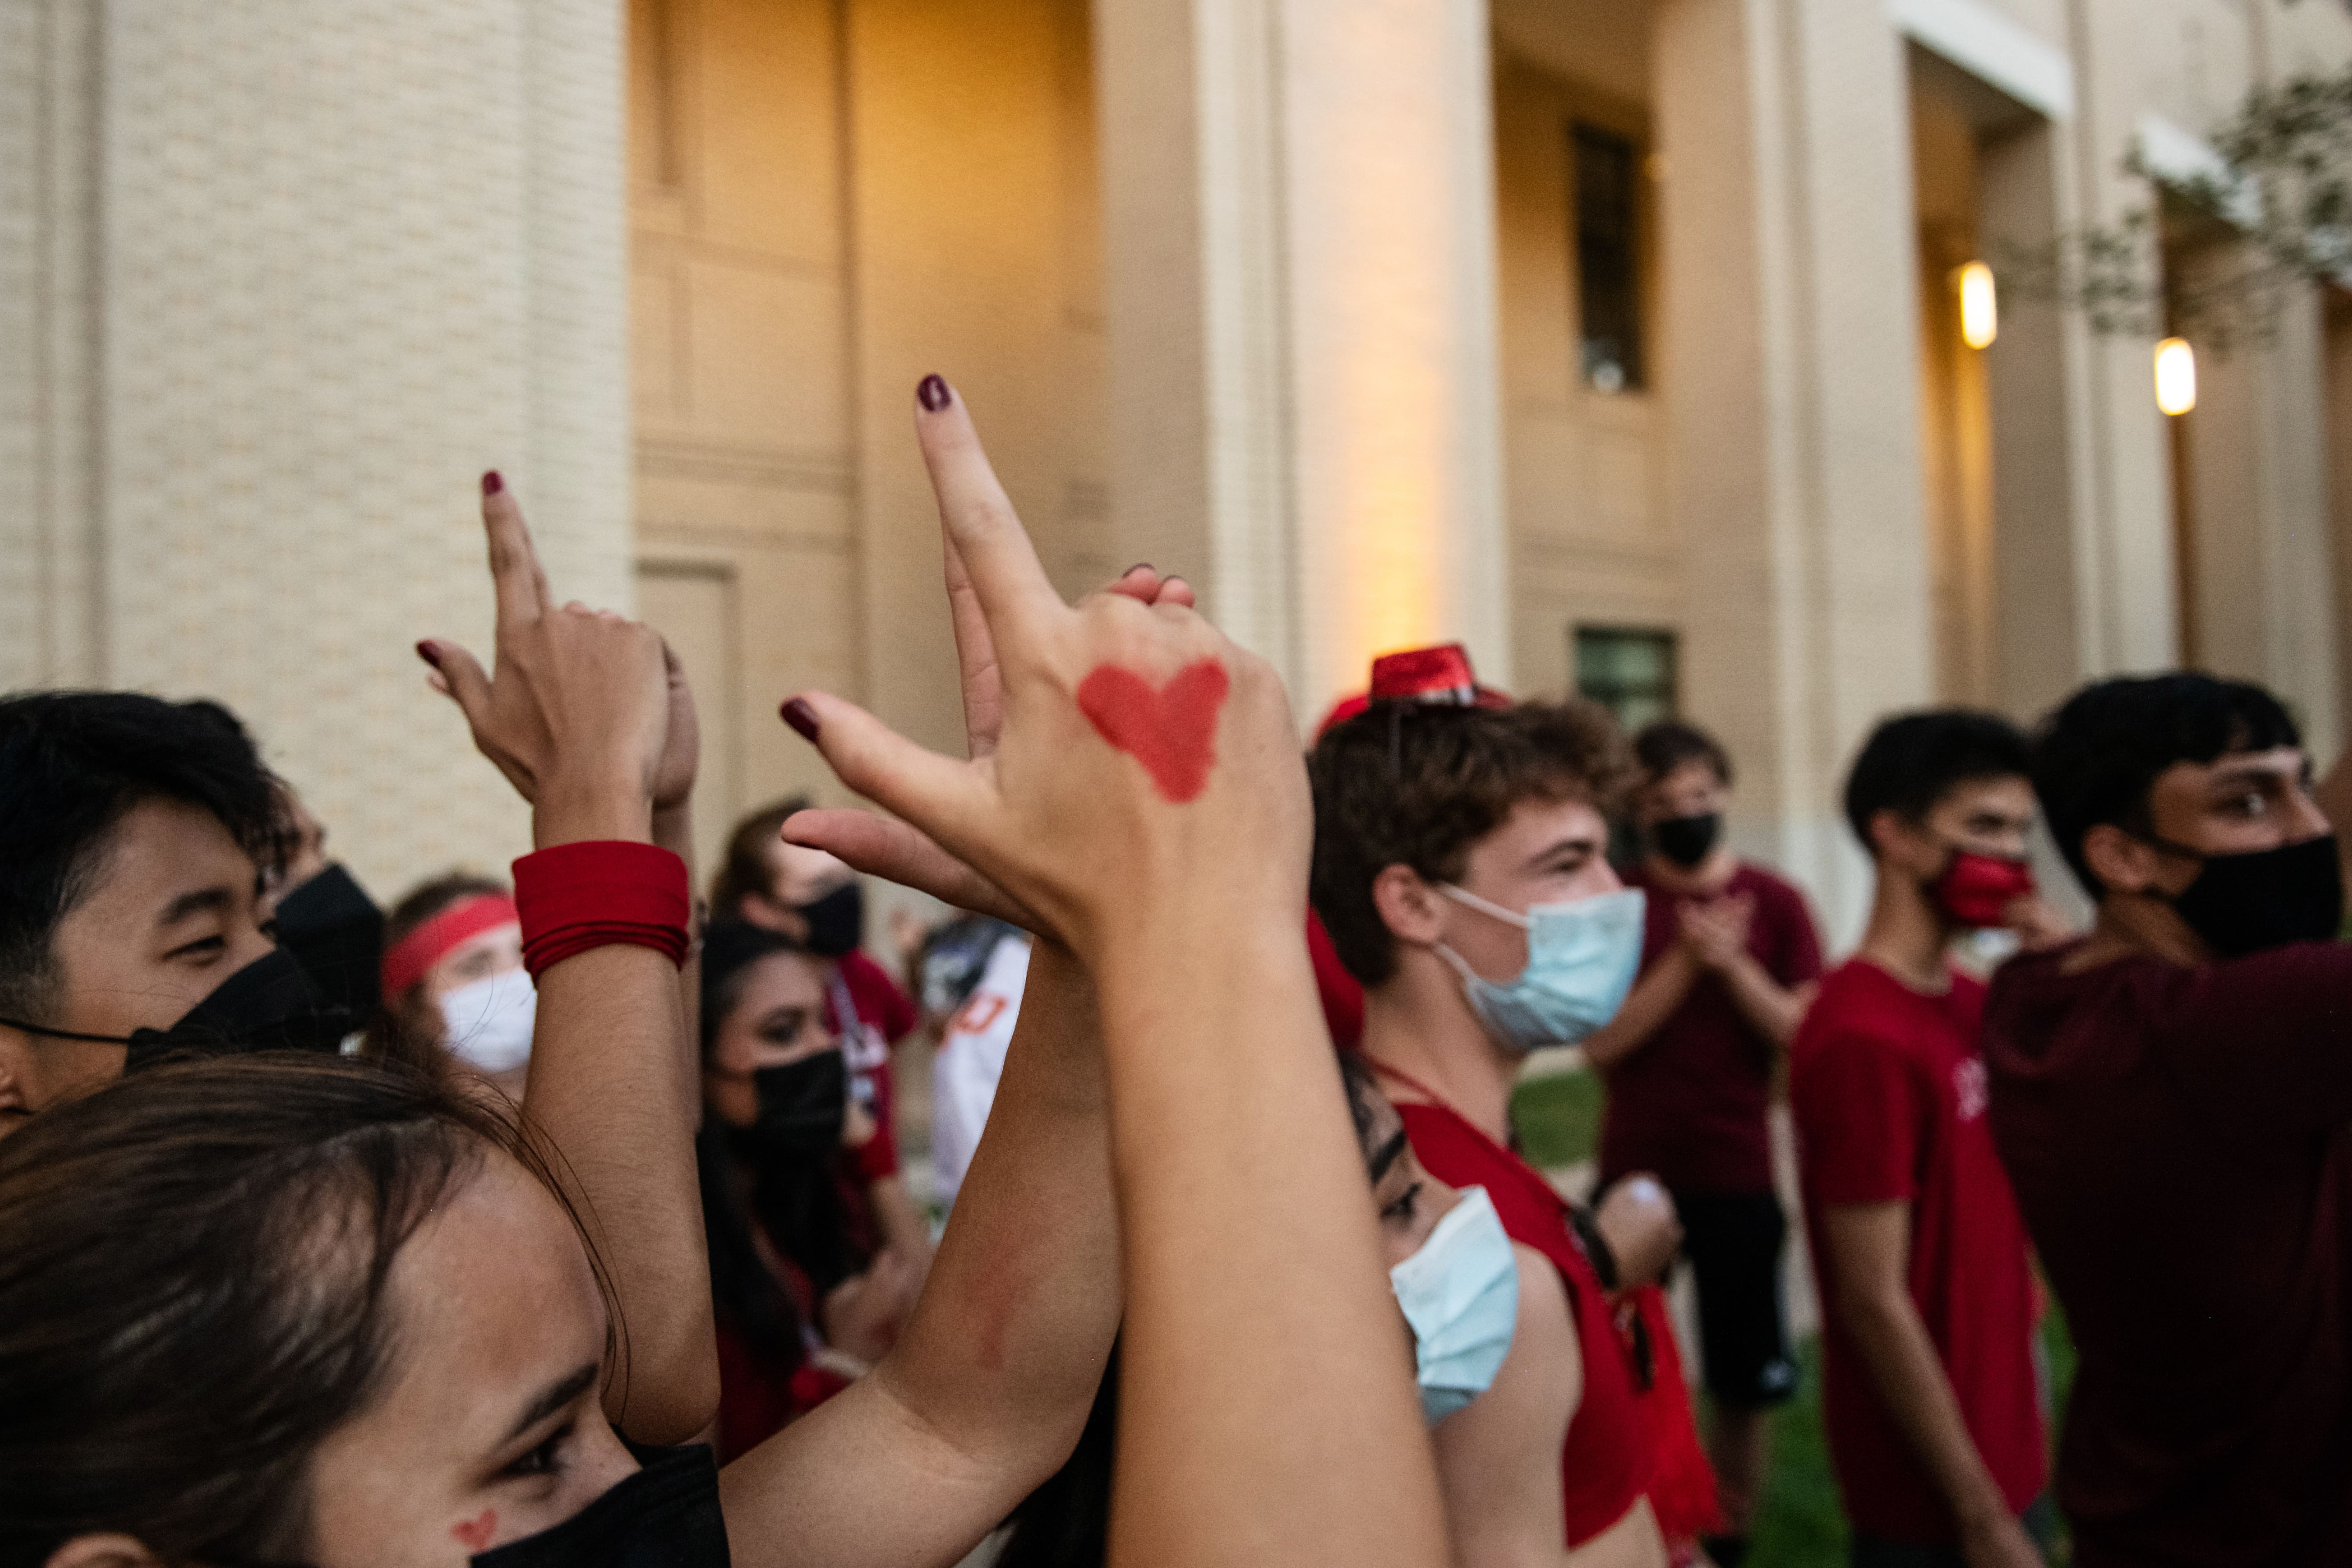 CMU students chant in a group for House Wars with a close up on a hand- painted heart